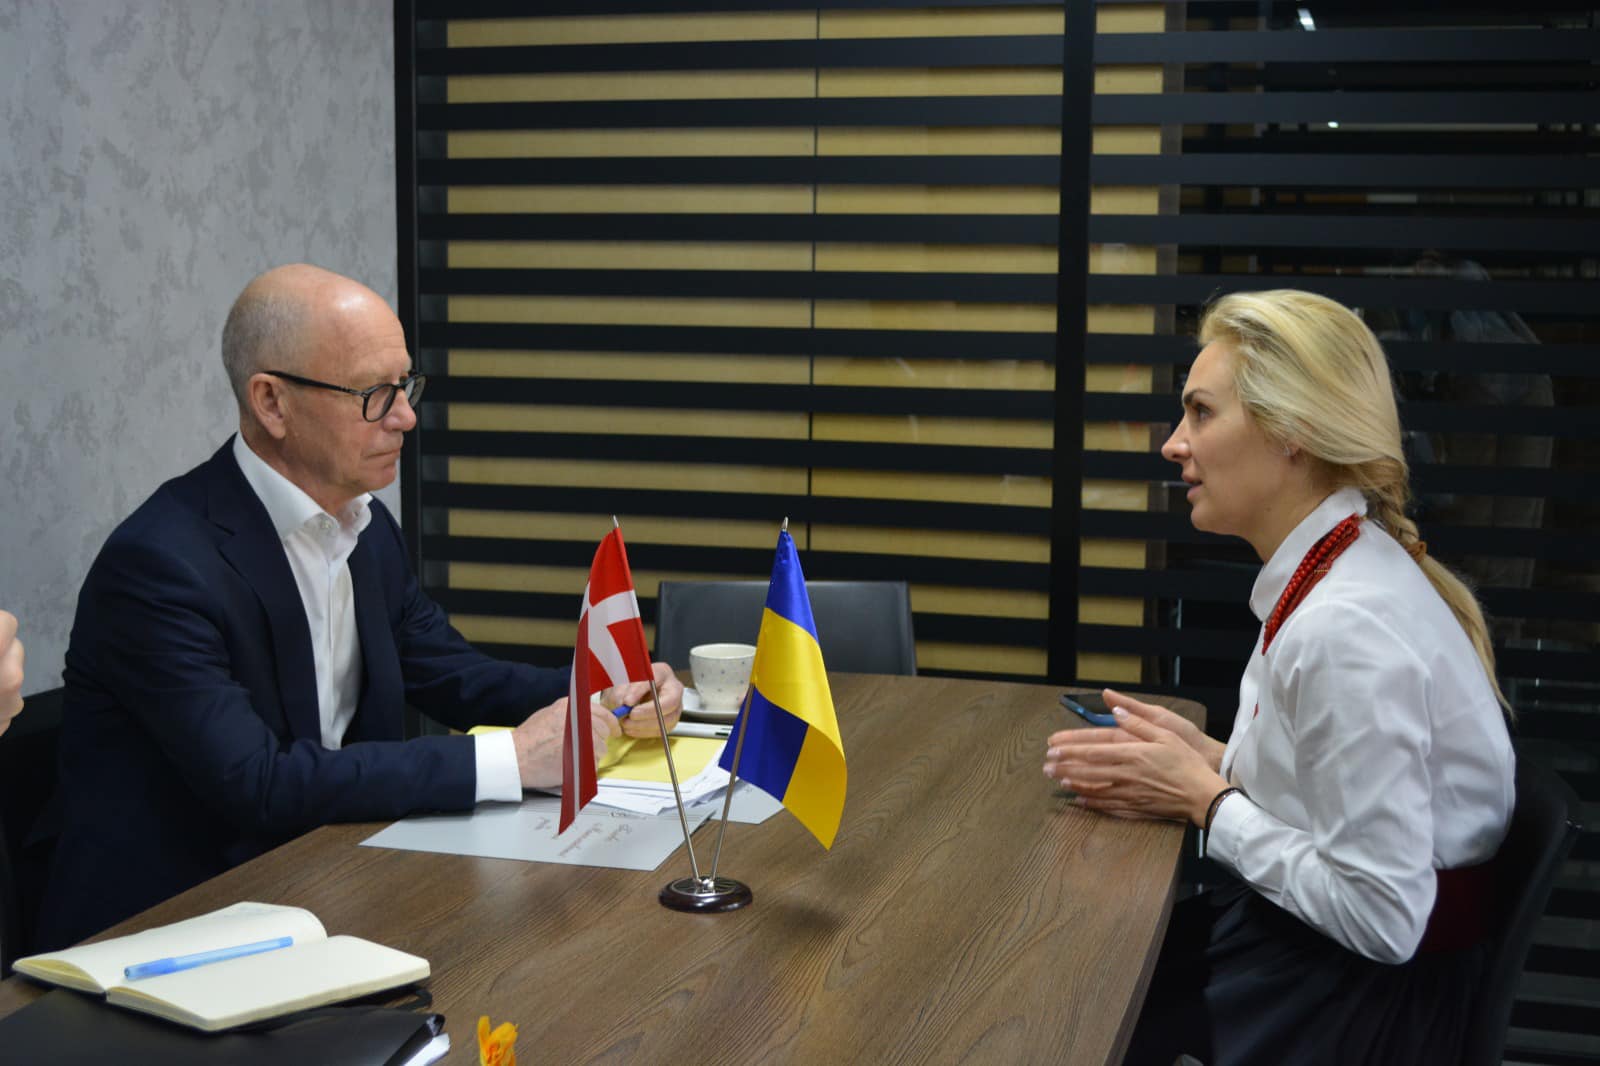 Denmark will open an office in Mykolaiv, which will be involved in reconstruction